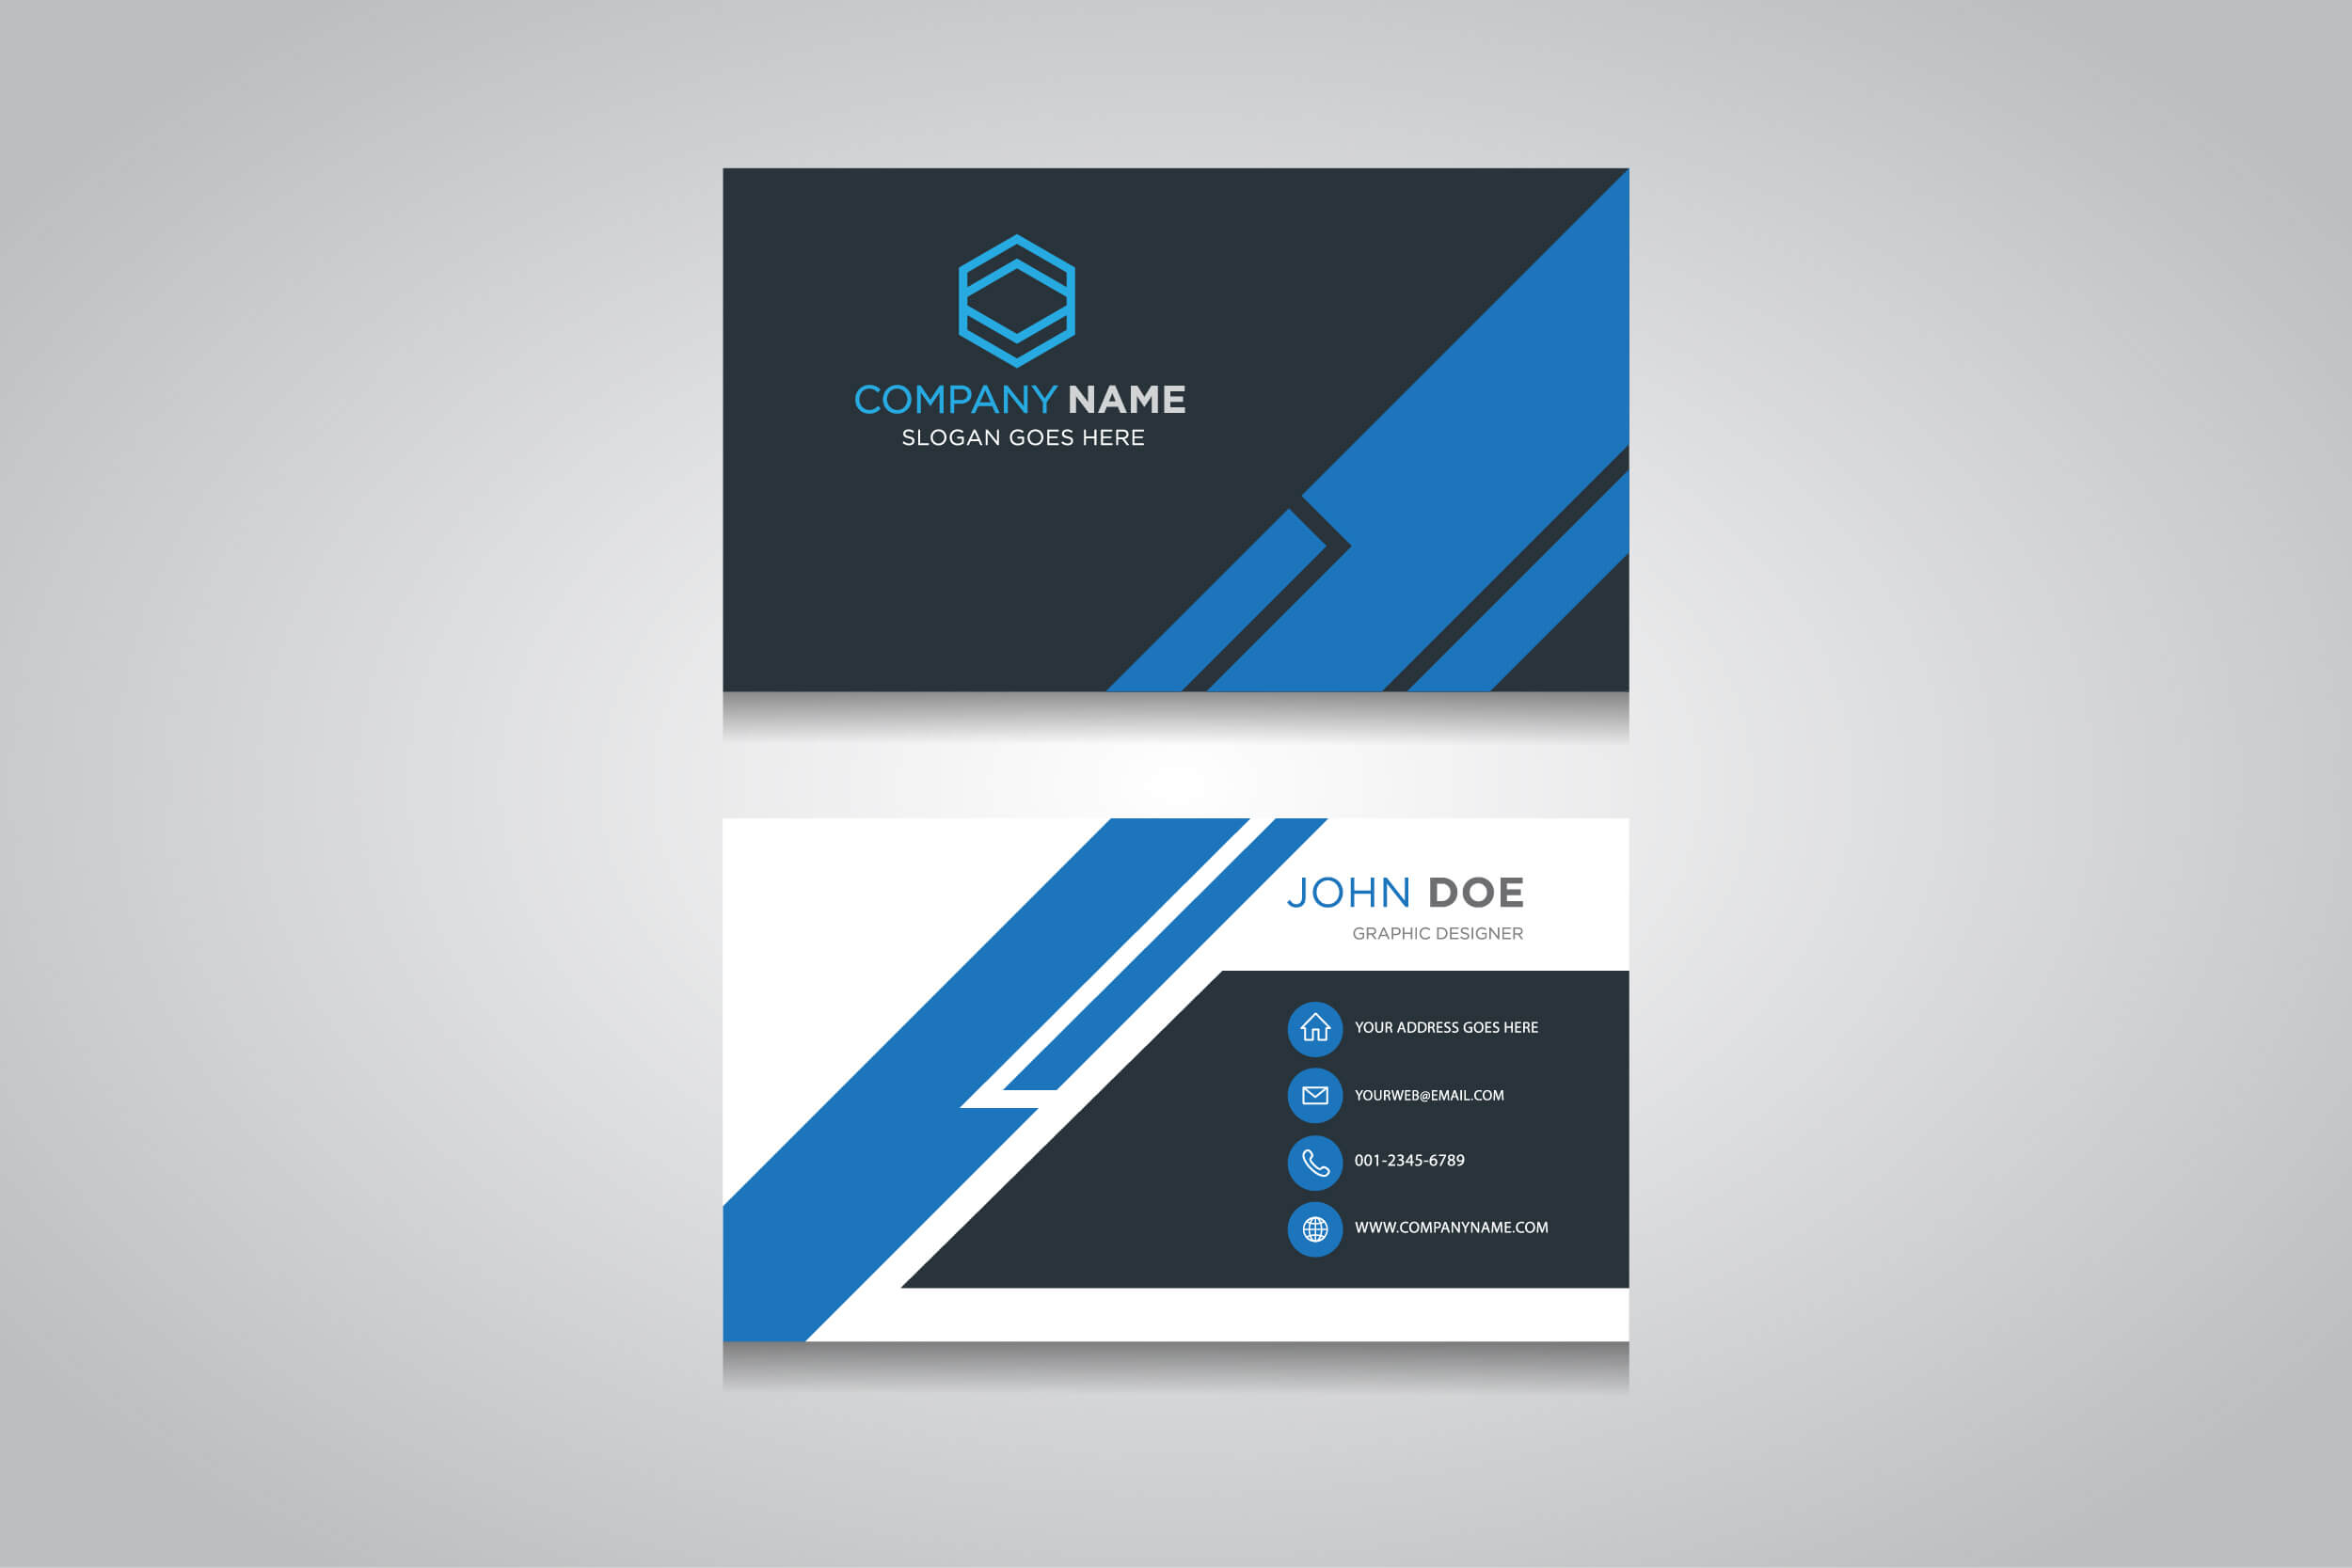 Business Card Template. Creative Business Card For Company Business Cards Templates